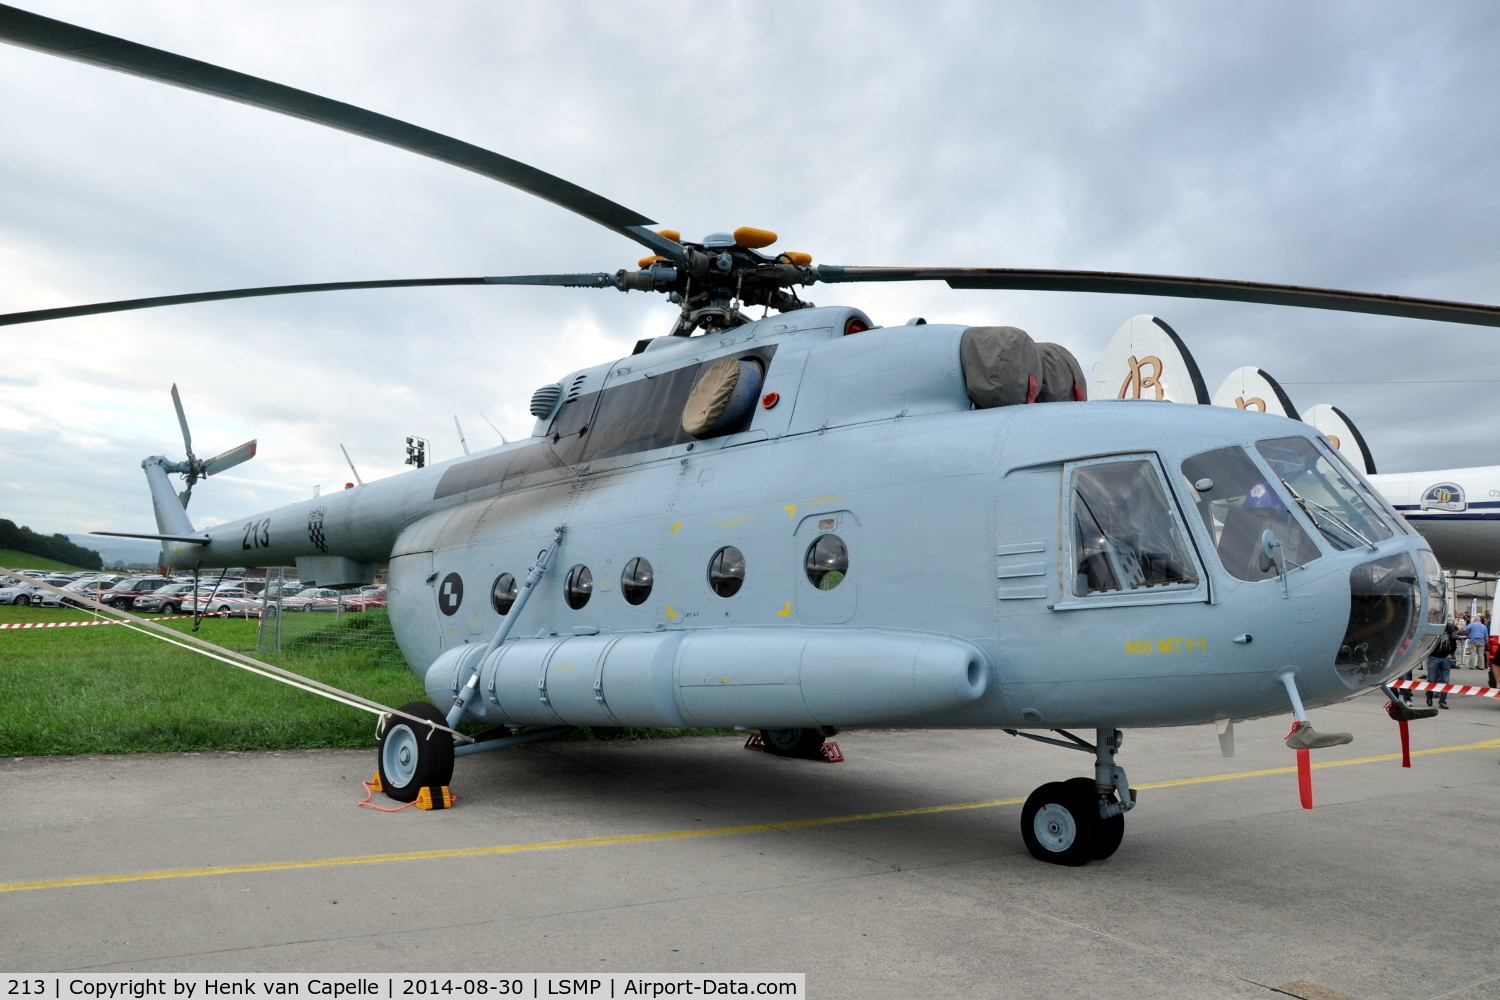 213, Mil Mi-8MTV-1 Hip C/N 96055, Mil Mi-8MTV-1 helicopter of the Croatian Air Force at Payerne Air Base, Switzerland.